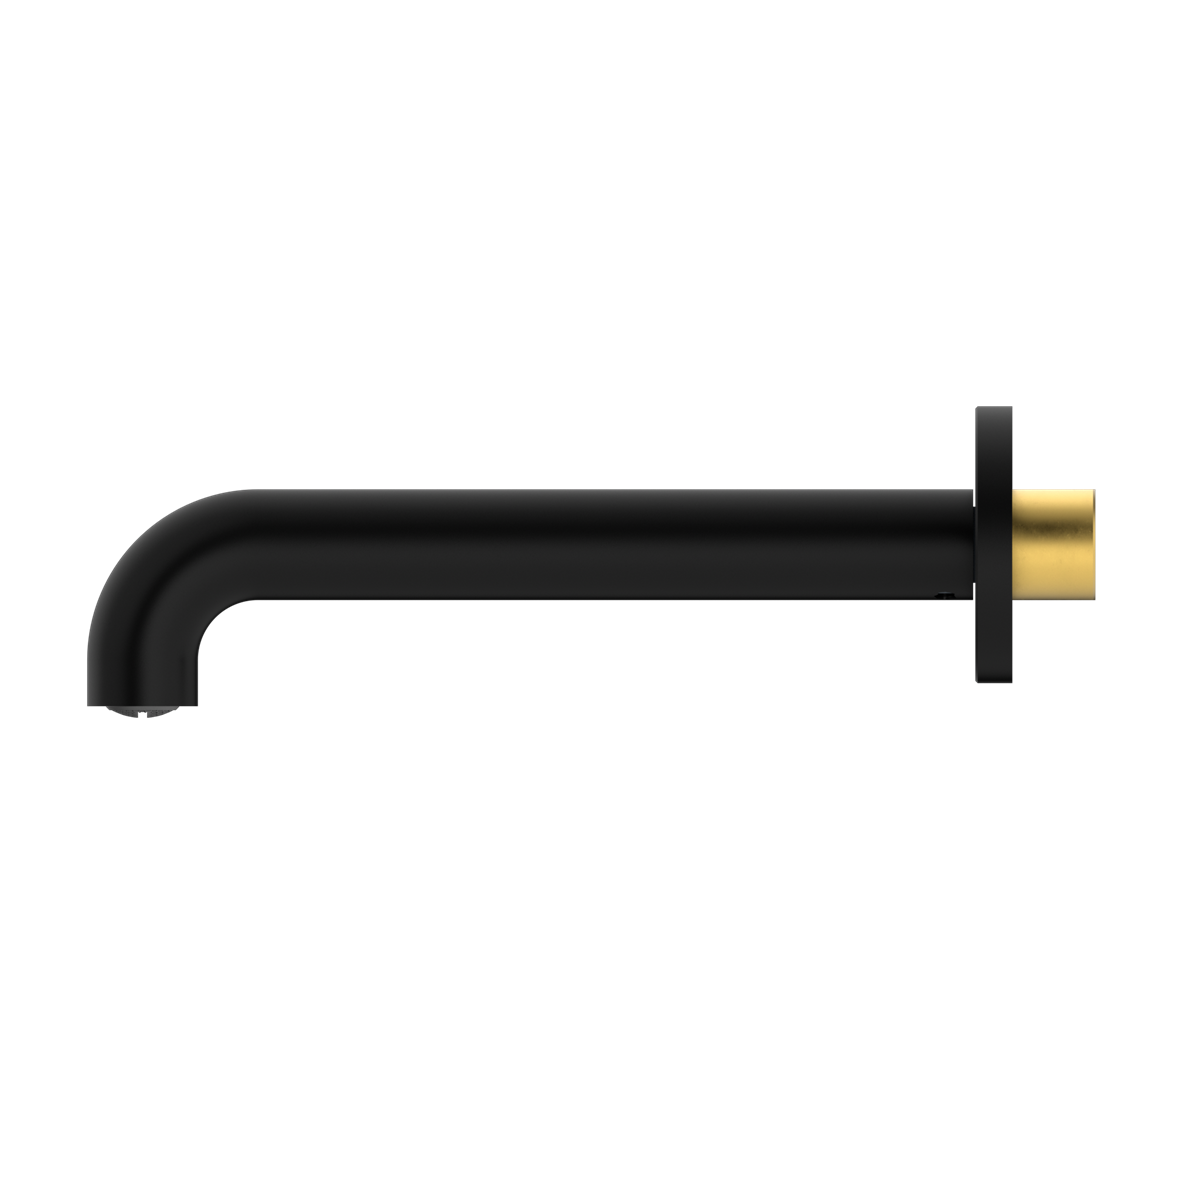 NERO MECCA BASIN/ BATH SPOUT MATTE BLACK (AVAILABLE IN 120MM, 160MM, 185MM, 230MM AND 260MM)